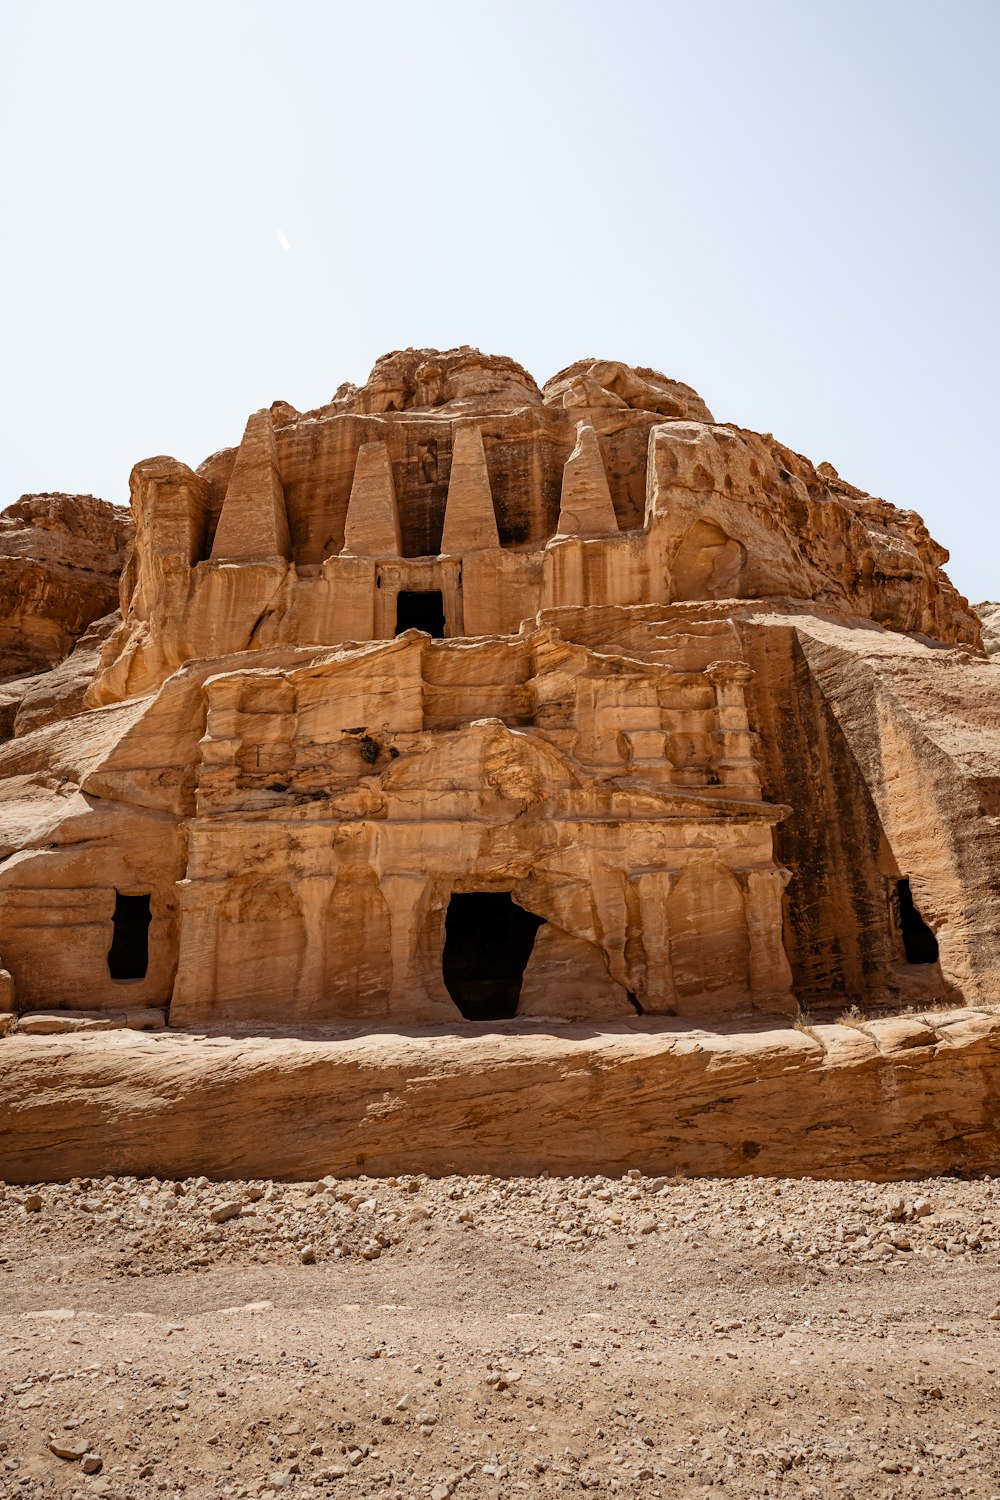 a large stone structure in the middle of a desert